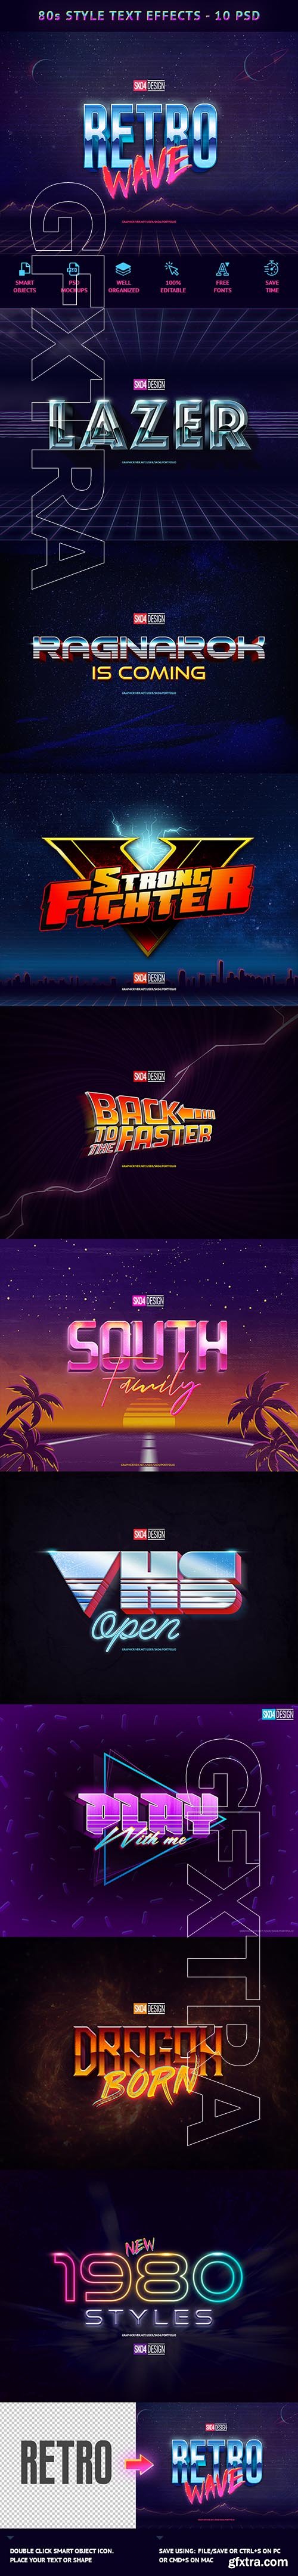 GraphicRiver - 80s Text Effects - 10 PSD 21905525